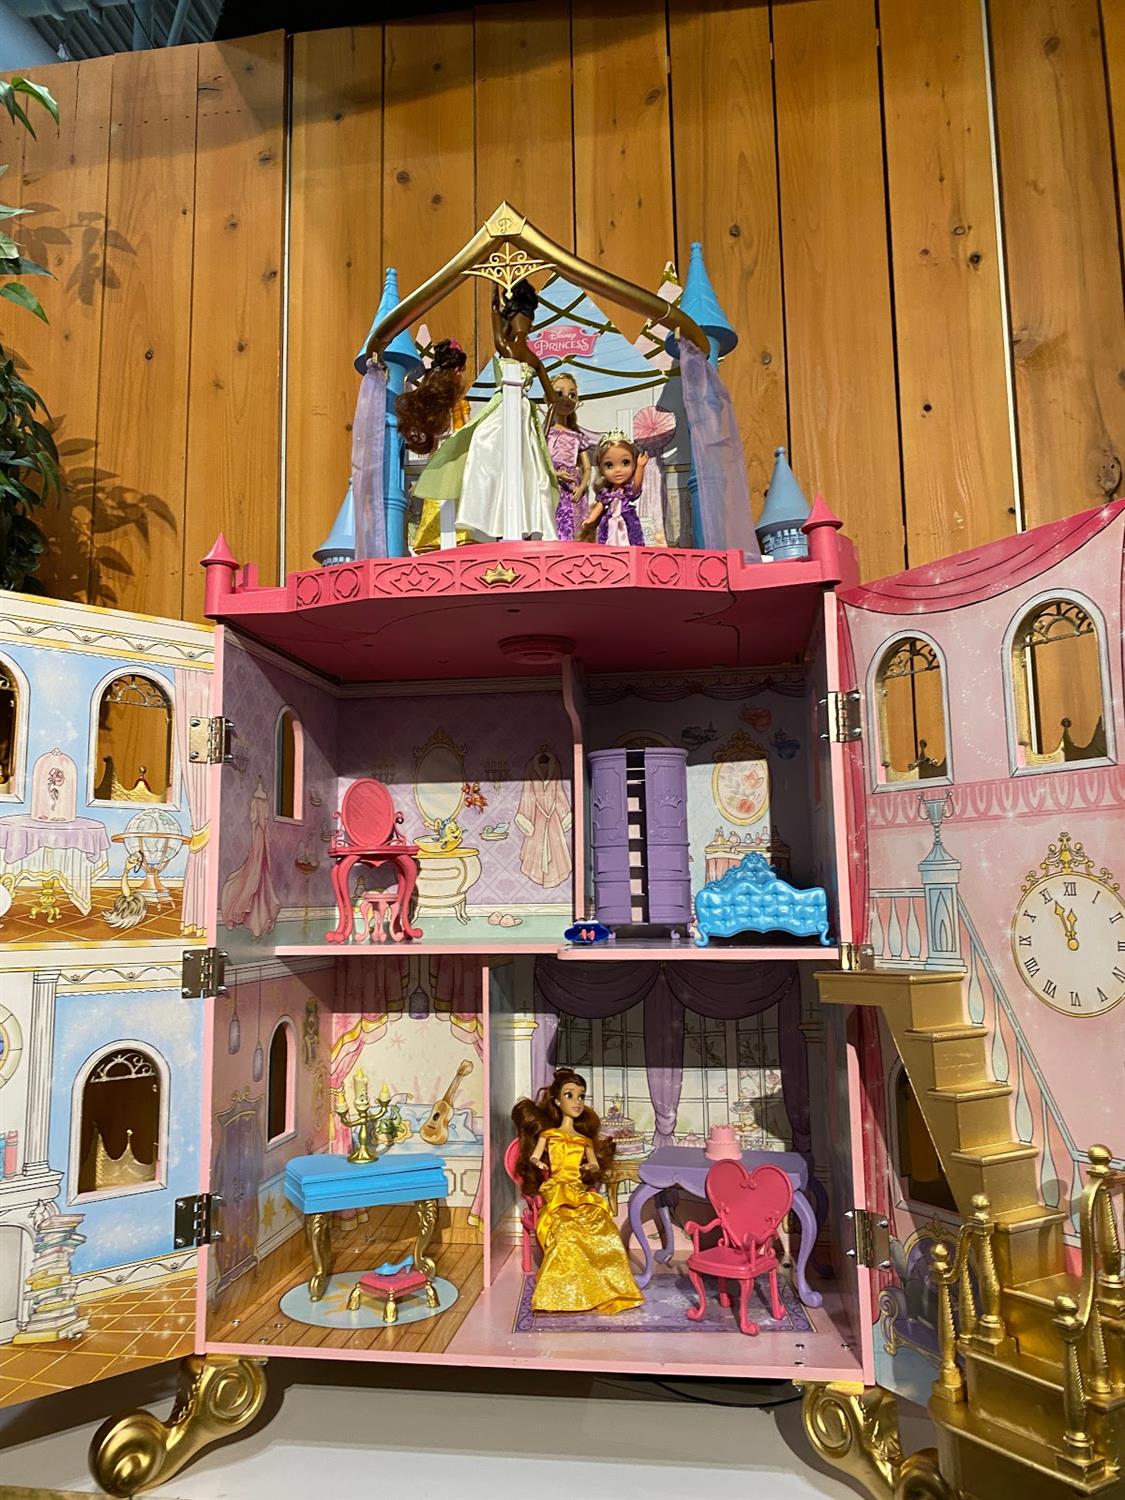 castle toy house